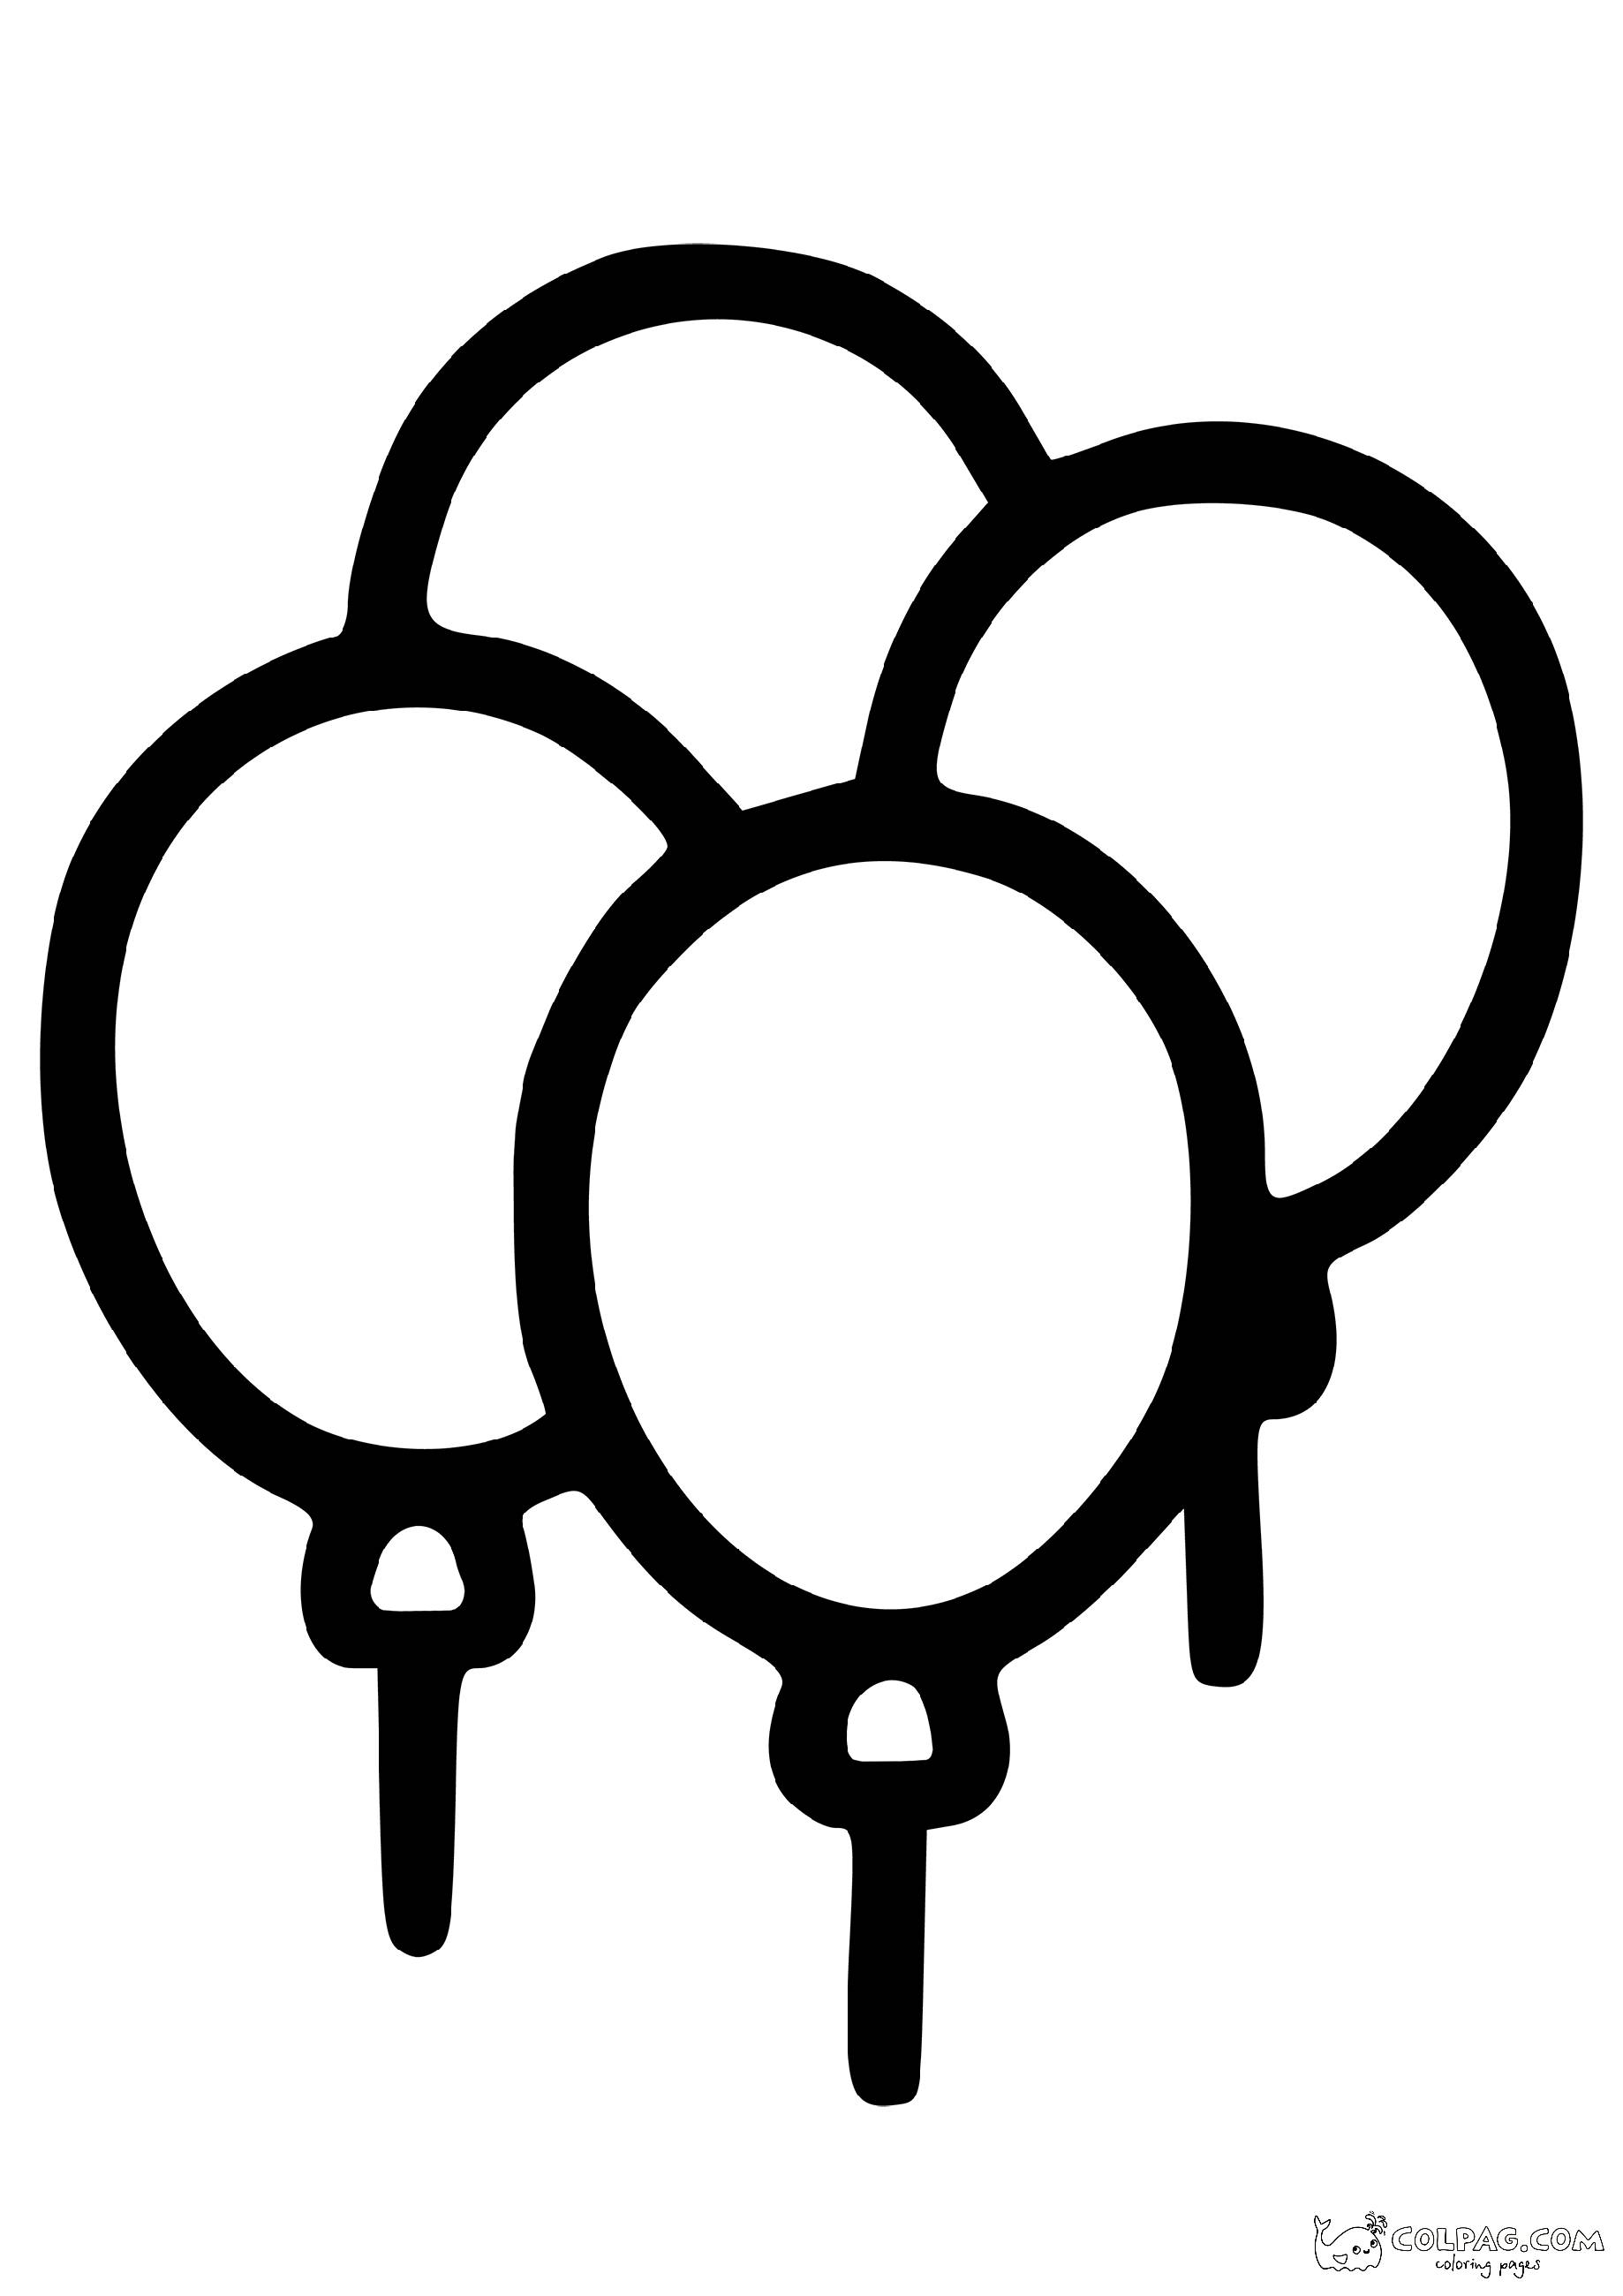 23-four-huge-baloons-coloring-page-colpag-23